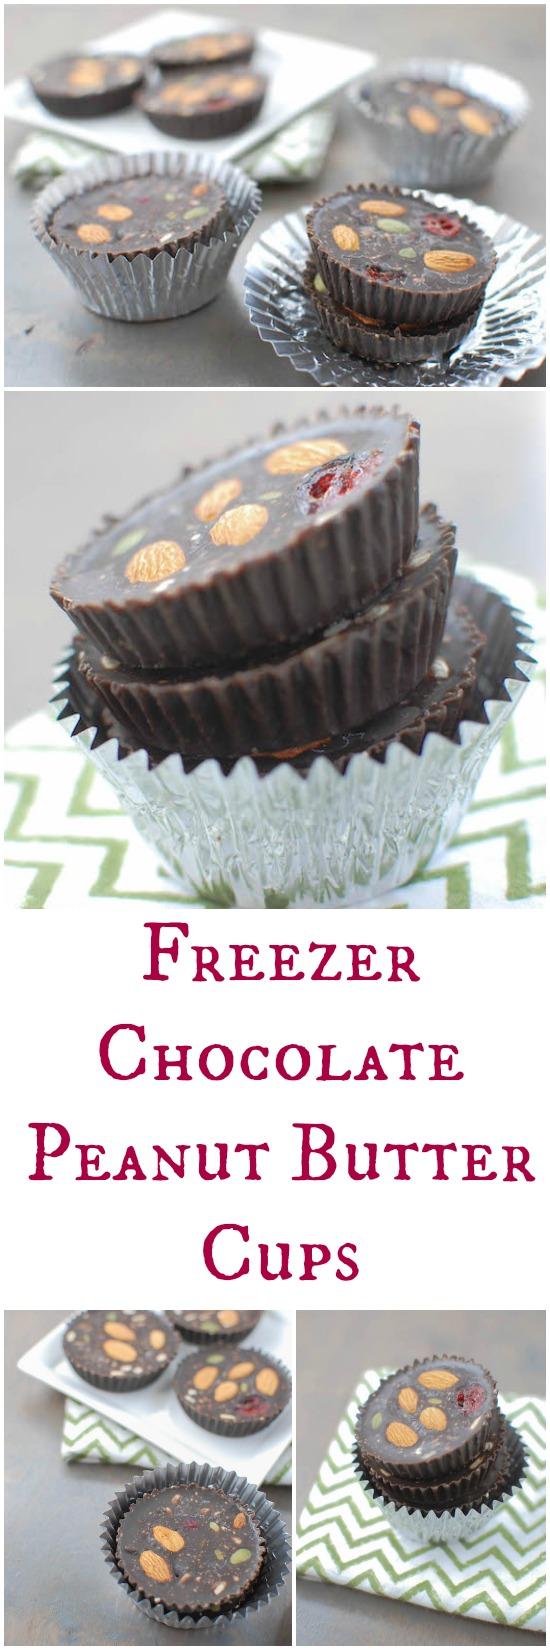 Always have a stash of these Chocolate Peanut Butter Cups in your freezer. Made with coconut oil and cocoa, they're dairy free and easy to customize!